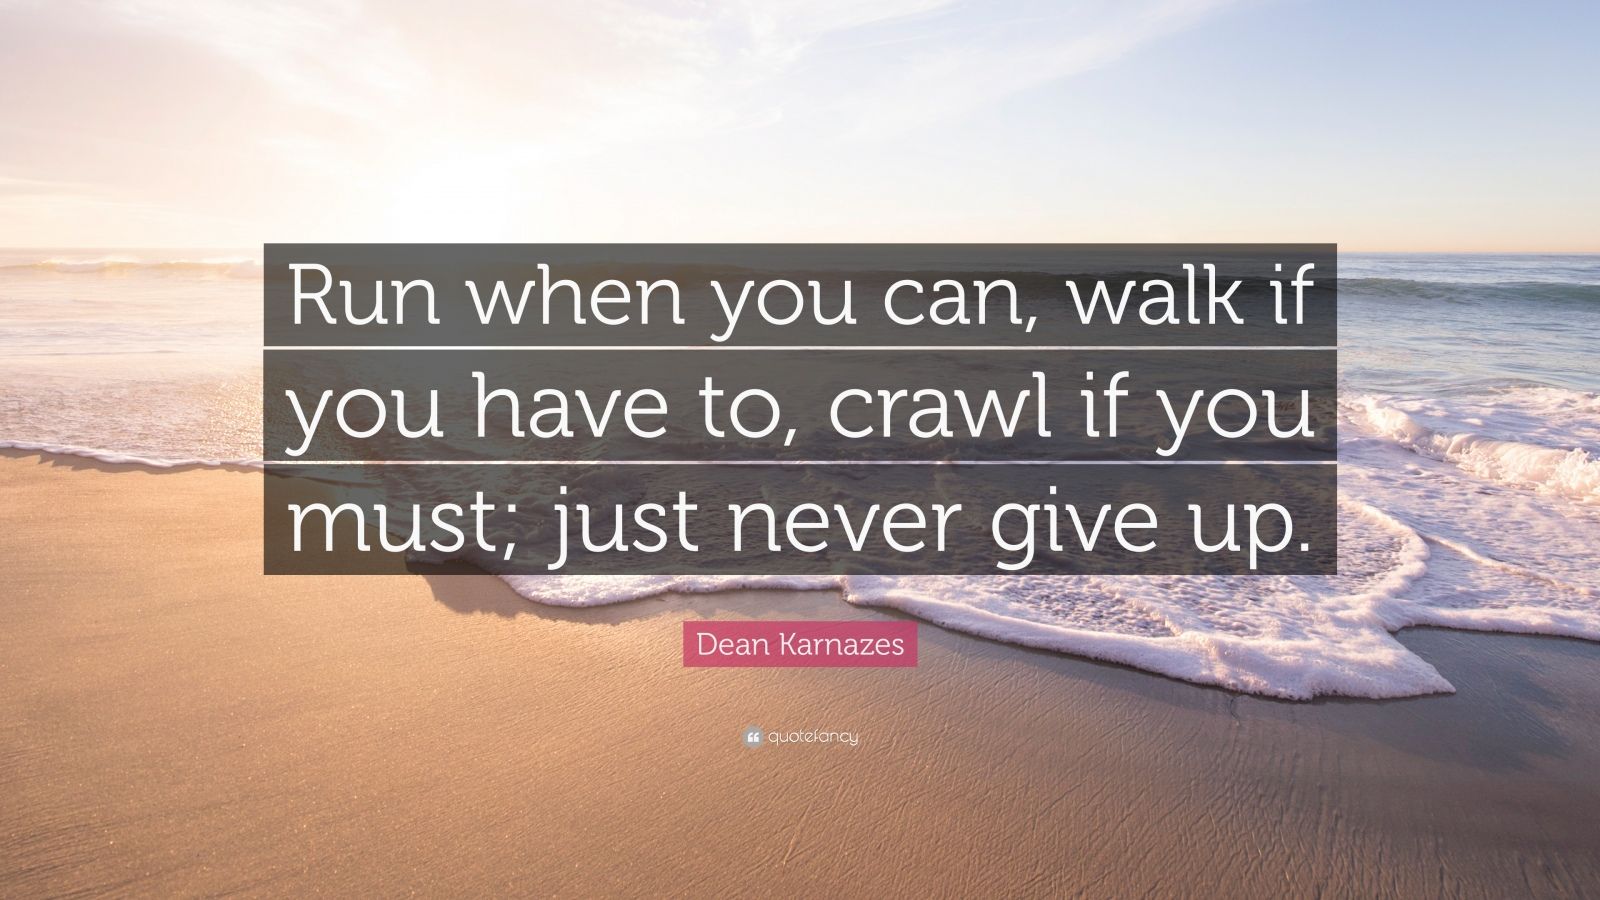 Dean Karnazes Quote: “Run when you can, walk if you have to, crawl if ...